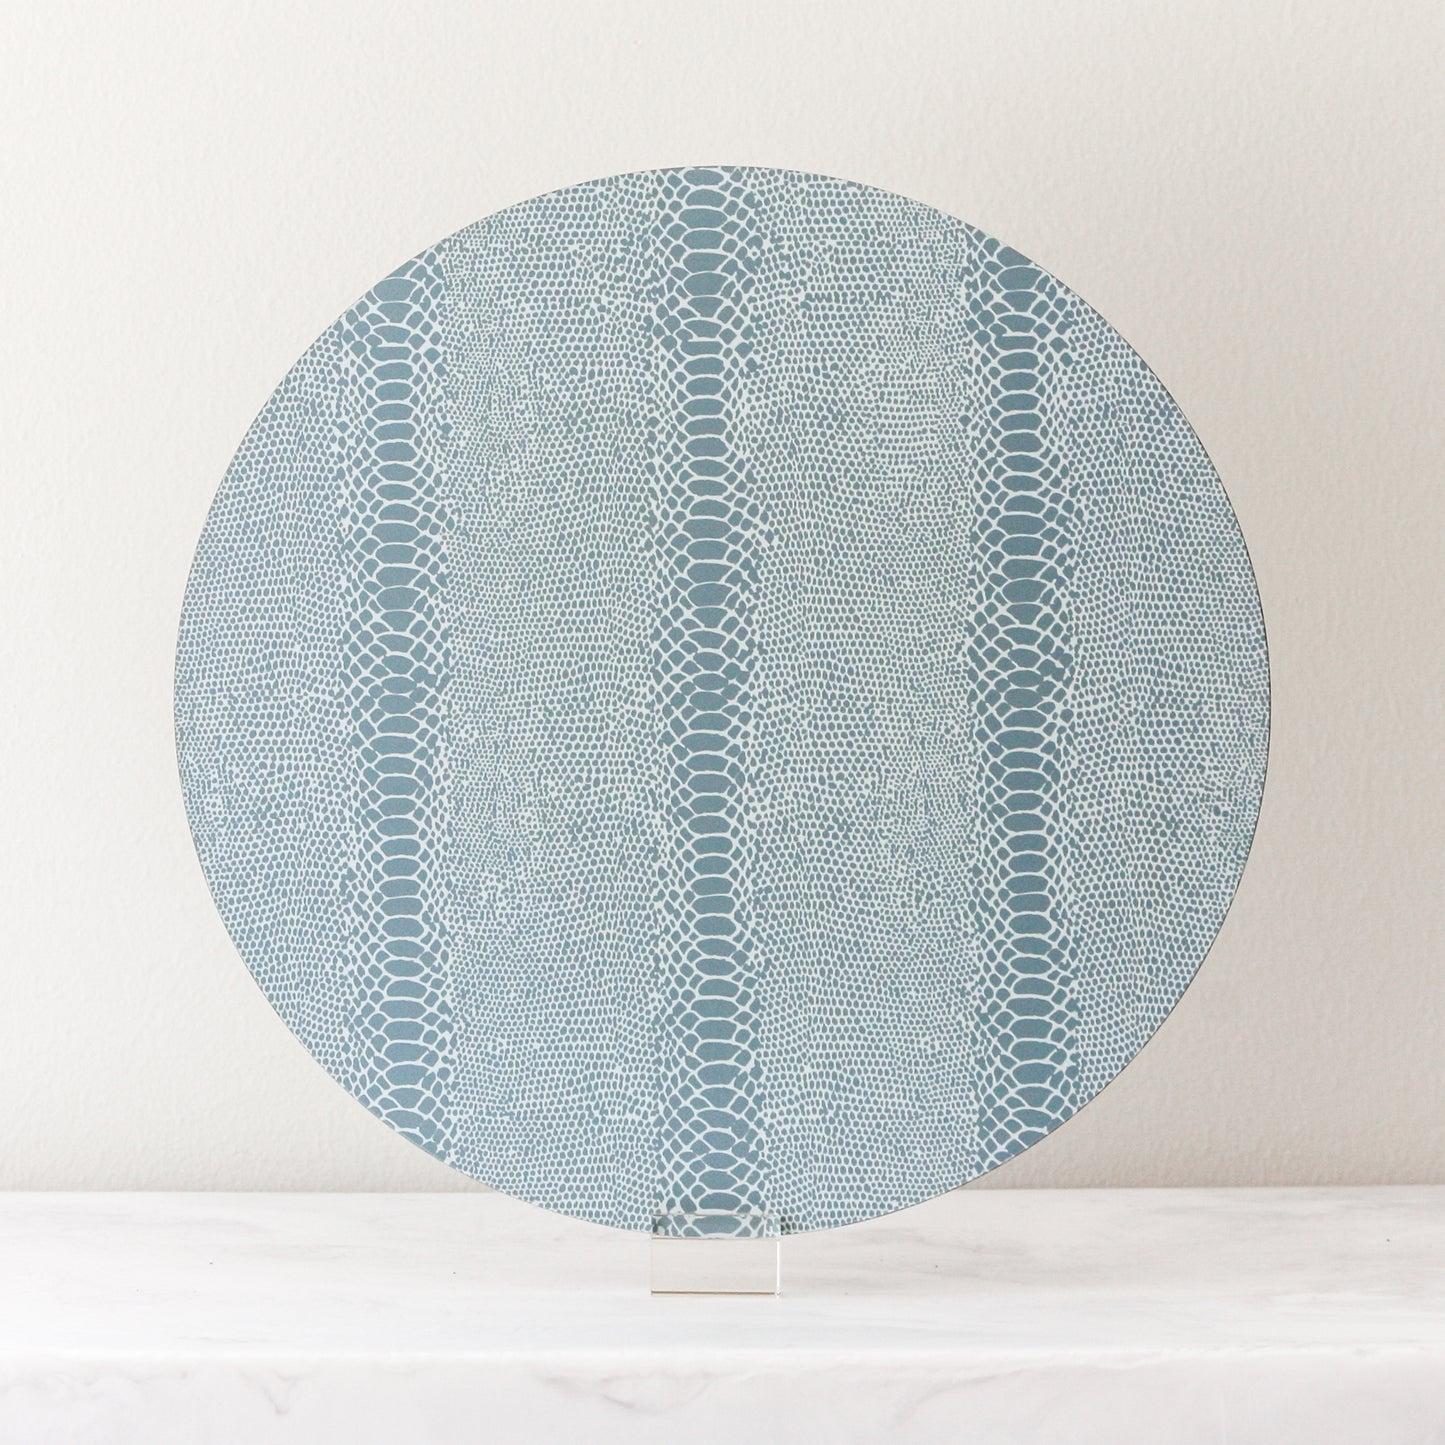 snake print placemats in light blue gray made of cork and wood by Tisch New York